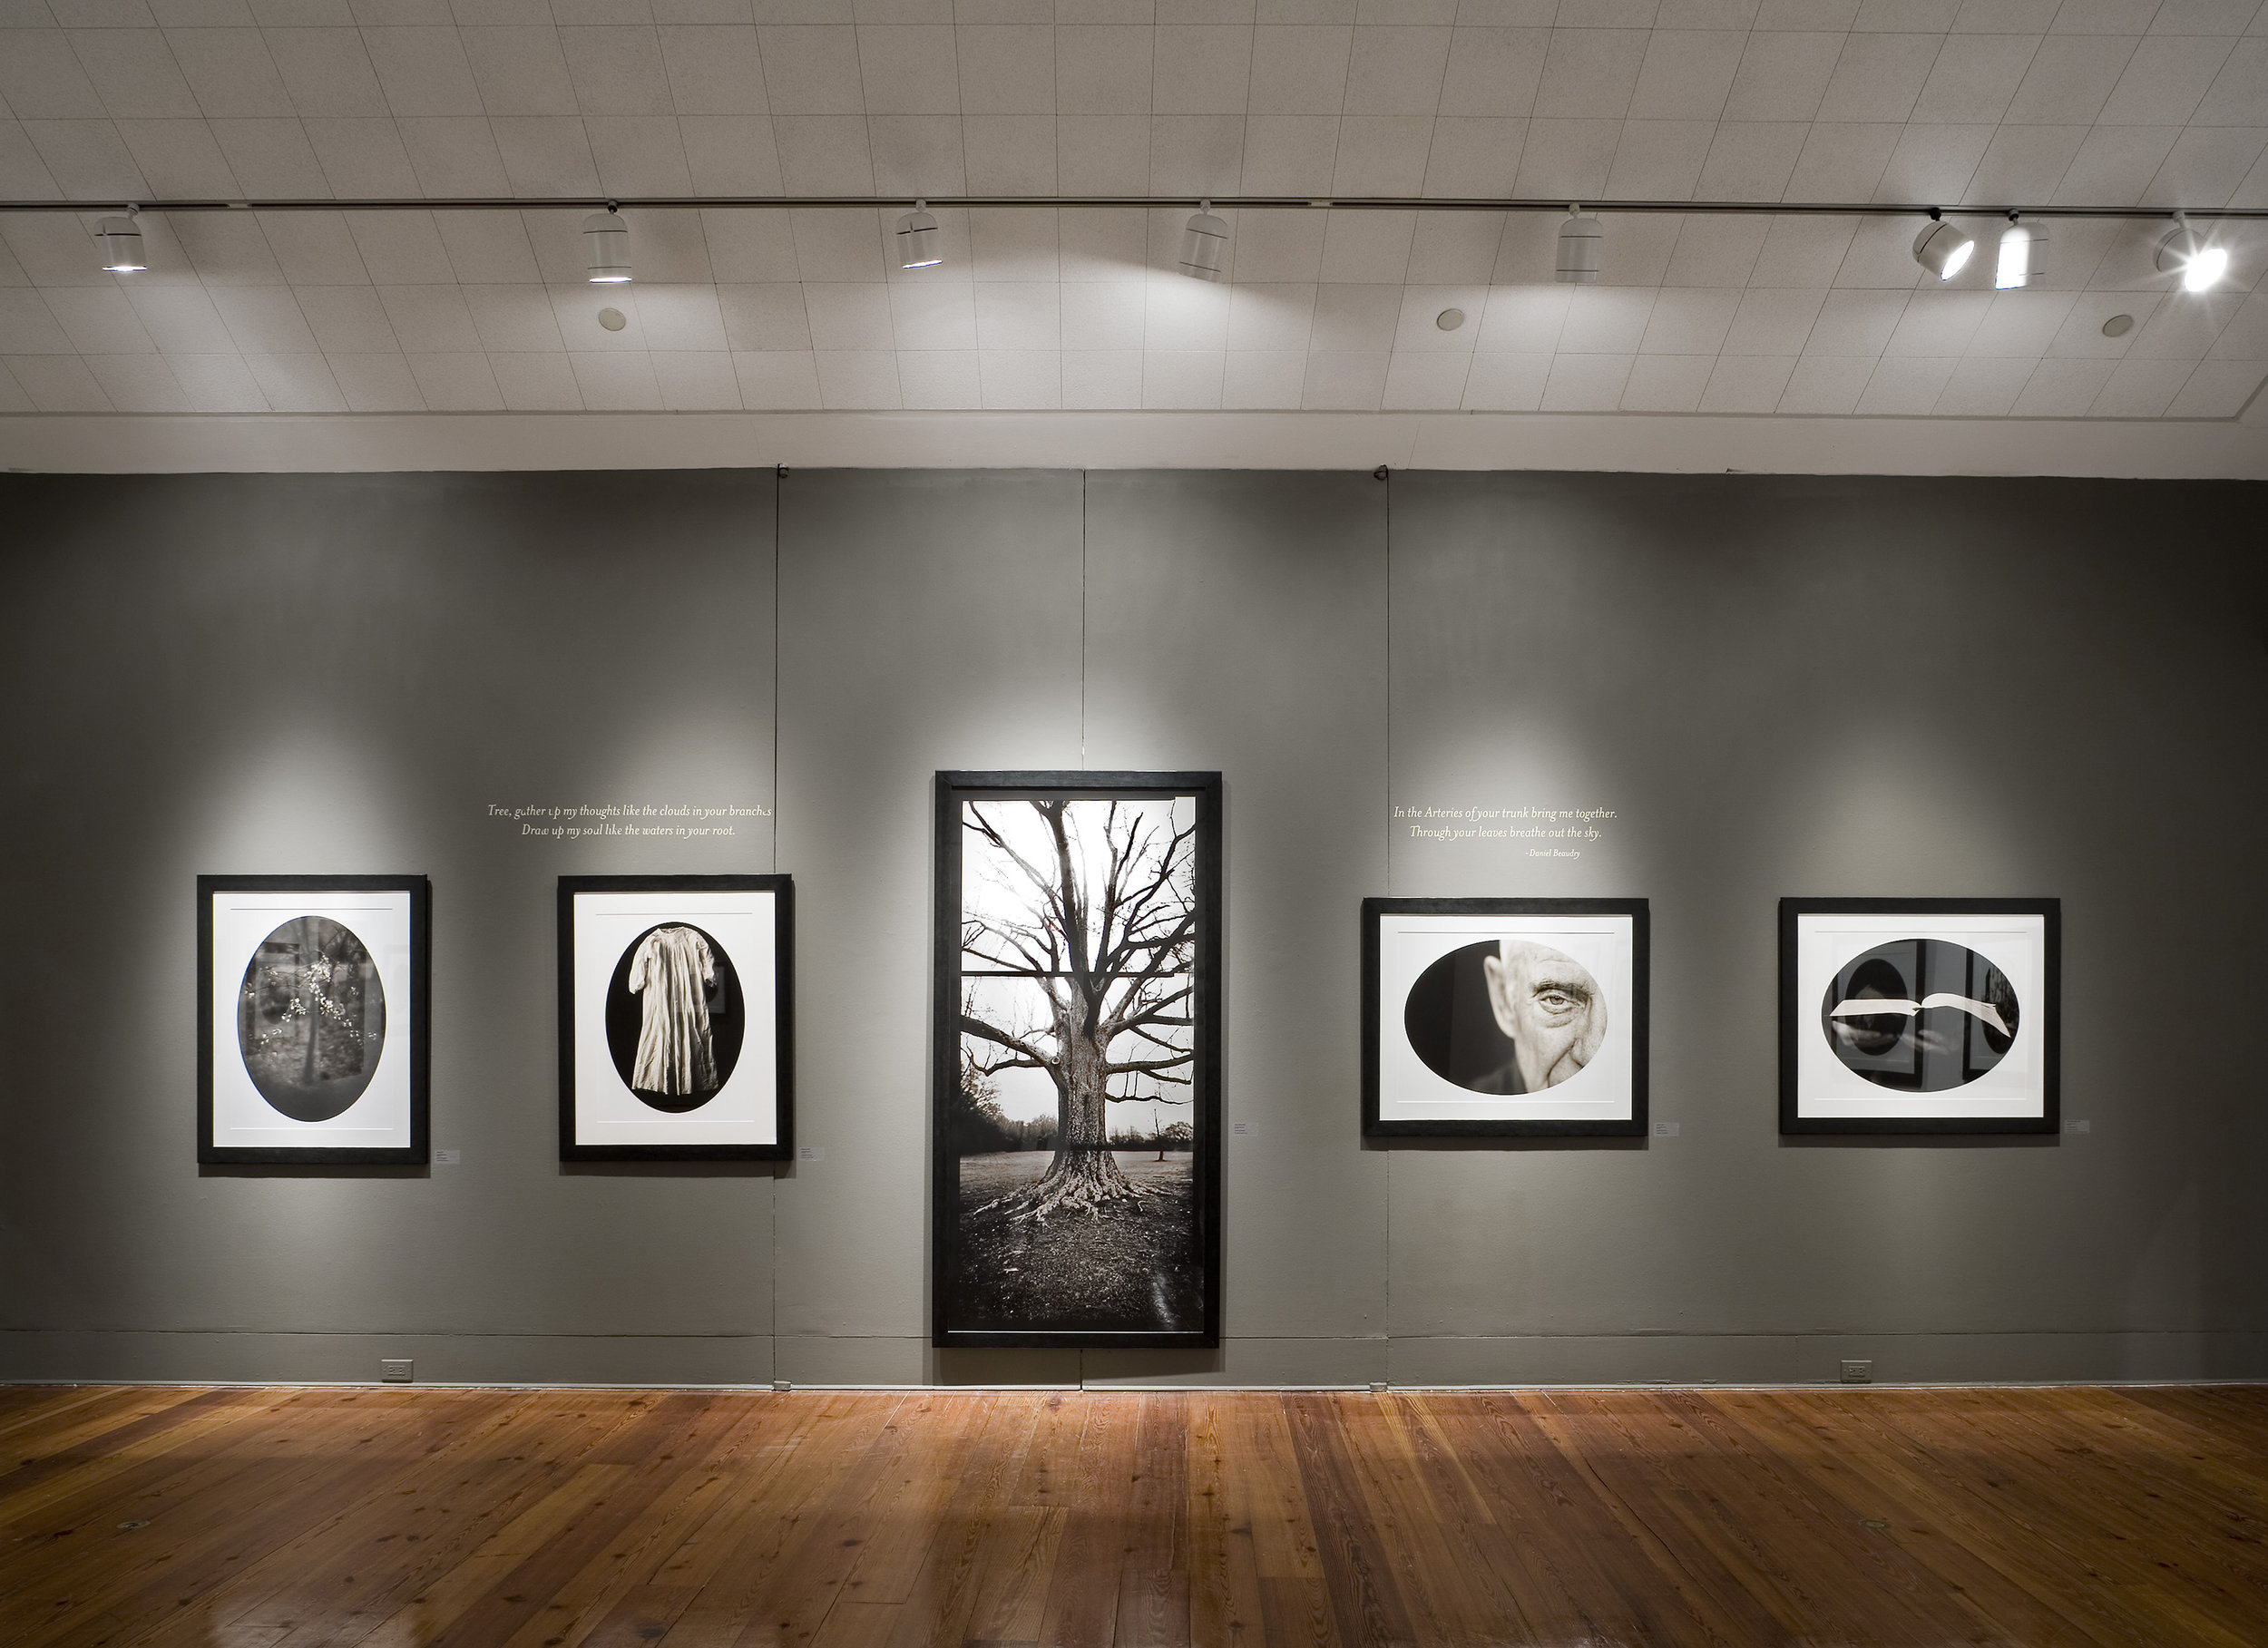  THE LIGHT FACTORY PHOTOGRAPHIC ARTS CENTER  ESTEEMING THE PEARLS EXHIBITION WITH LUIS GONZALEZ PALMA 